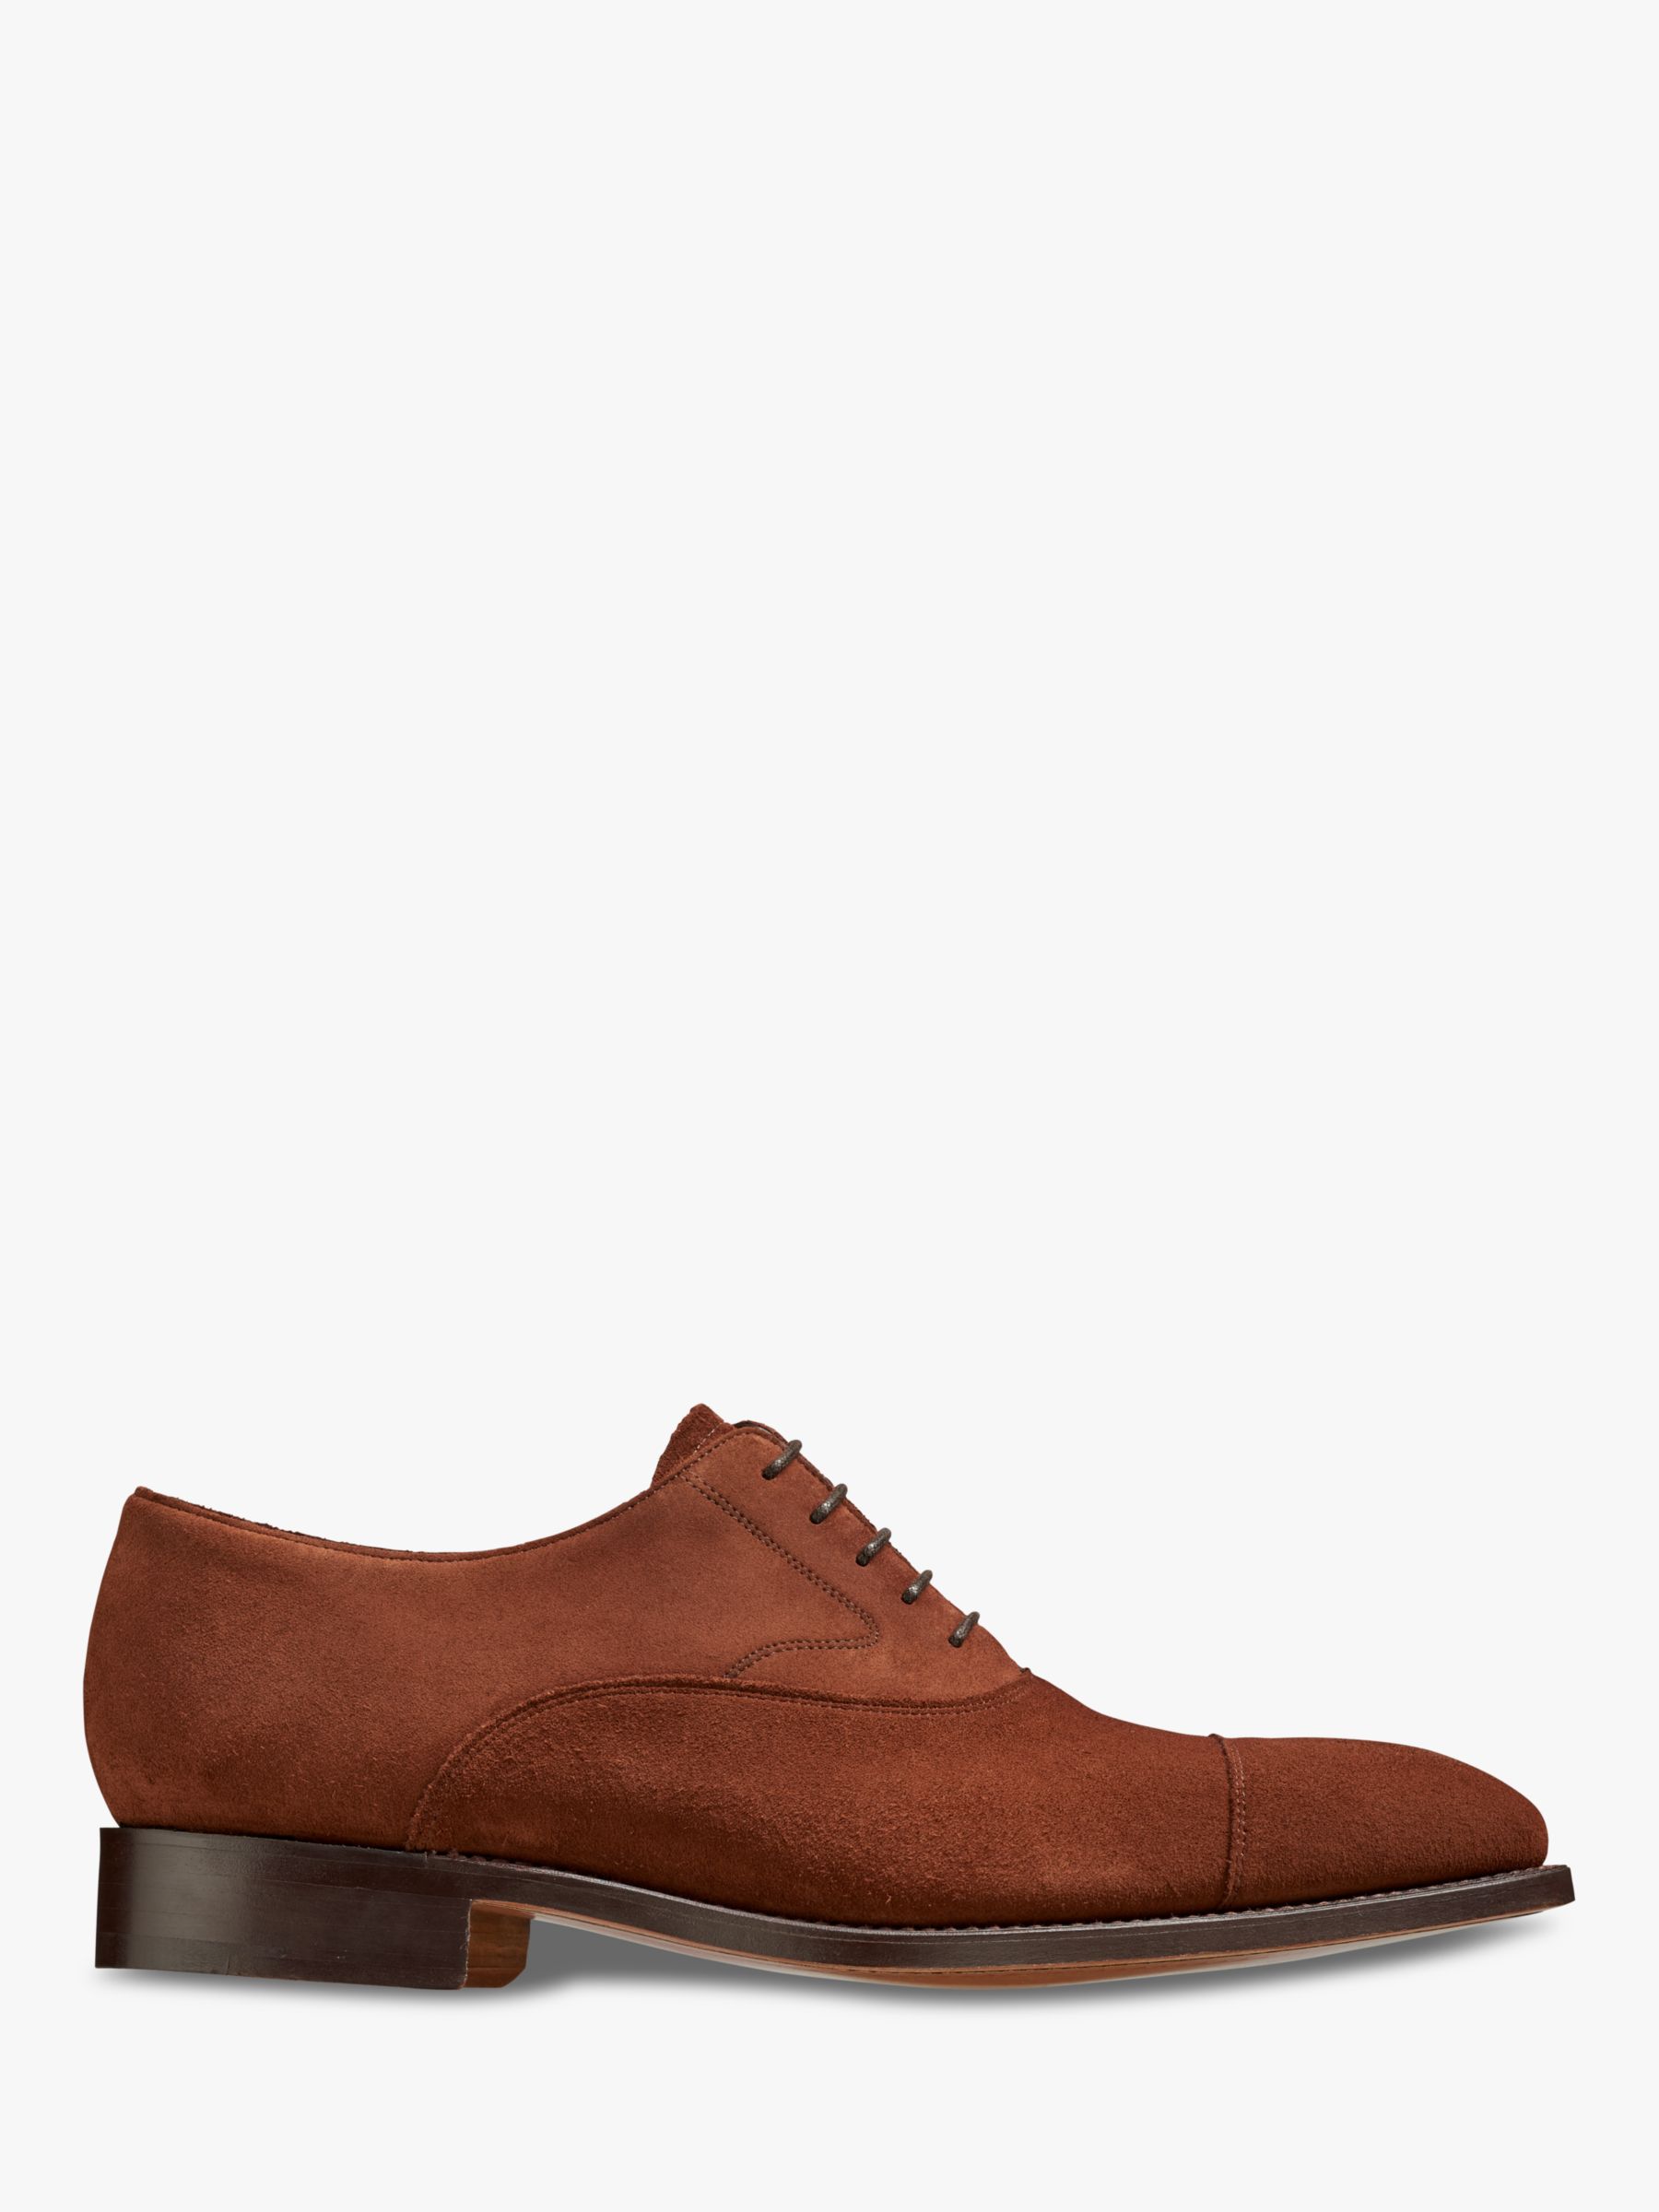 Barker Argyll Suede Toecap Oxford Shoes 